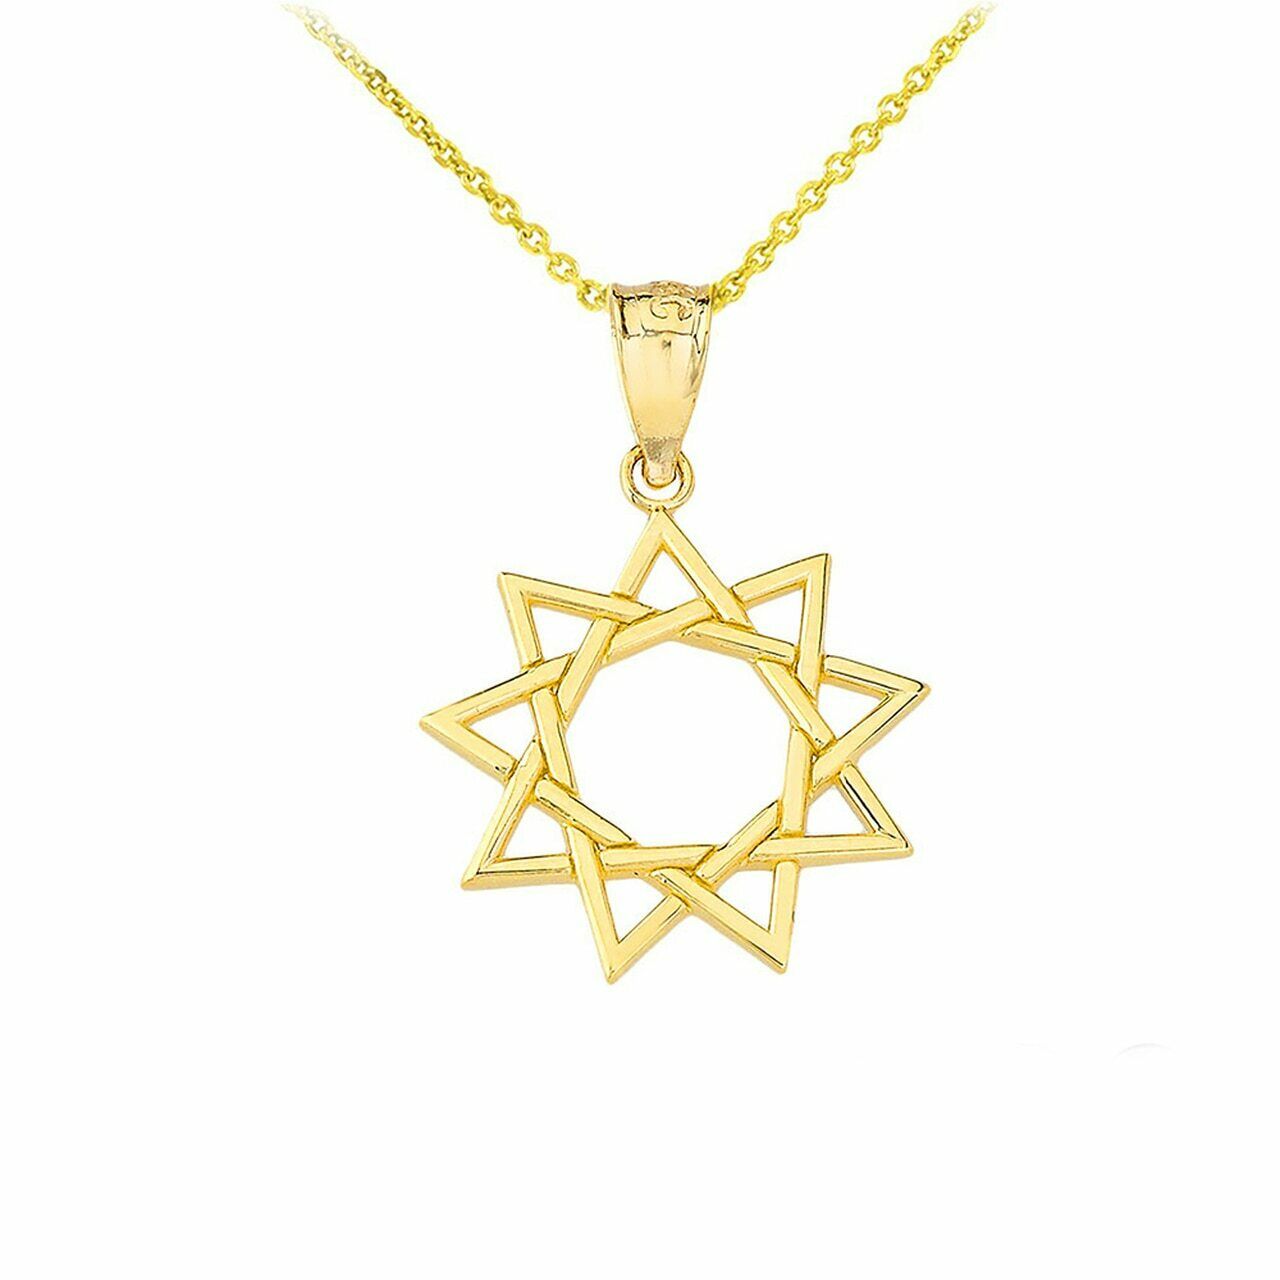 Solid 14k Yellow Gold 9 Star Baha'i Sun Openwork Pendant Necklace